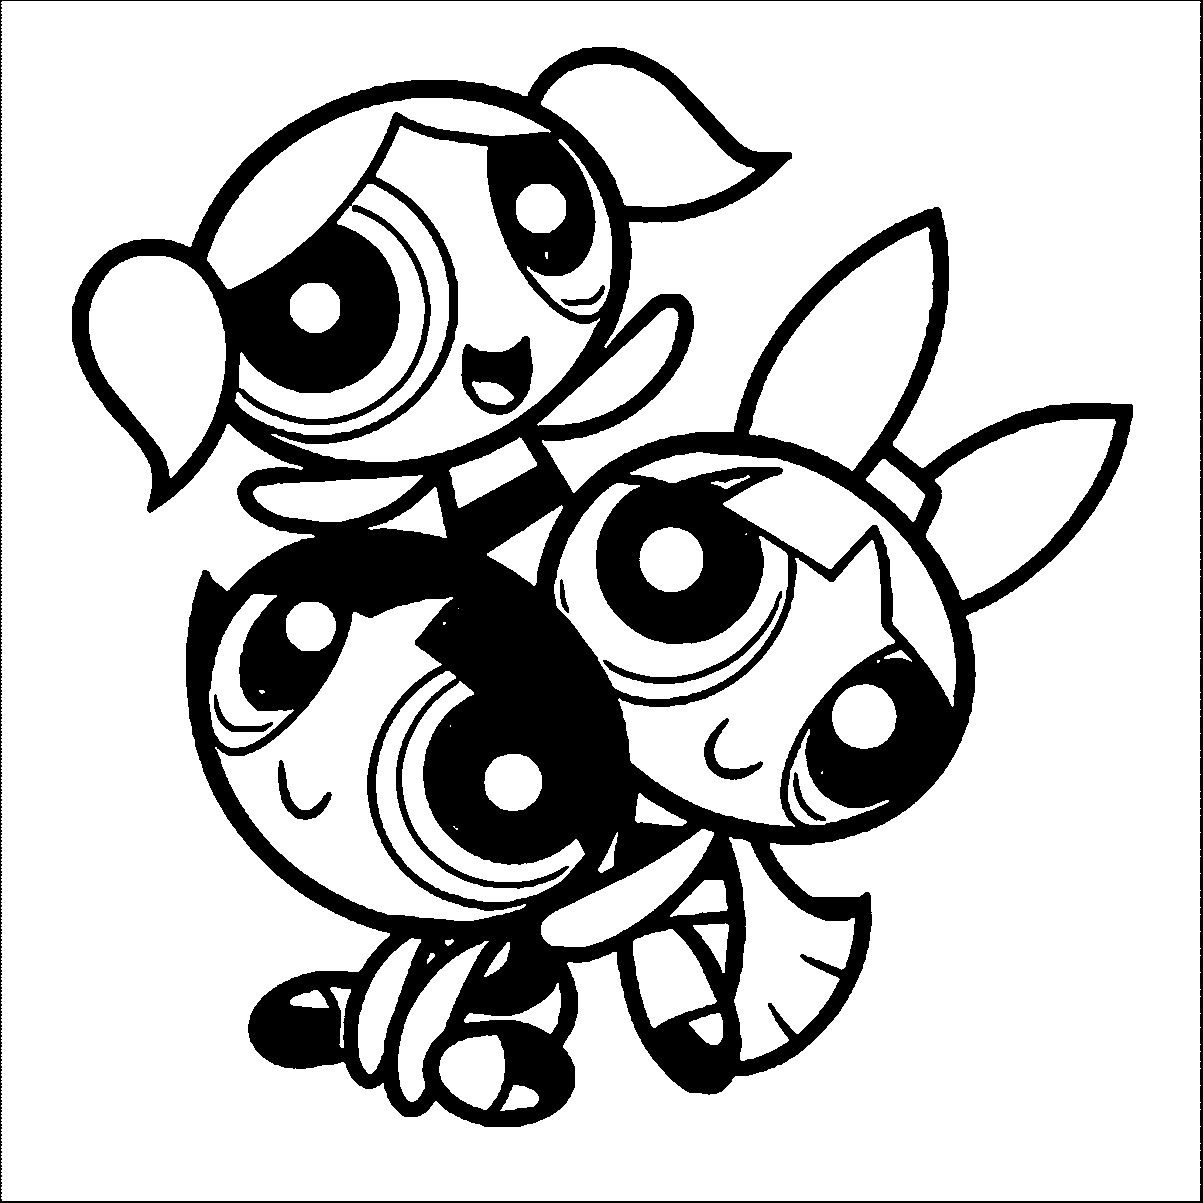 Powerpuff Girls Coloring Pages | Wecoloringpage